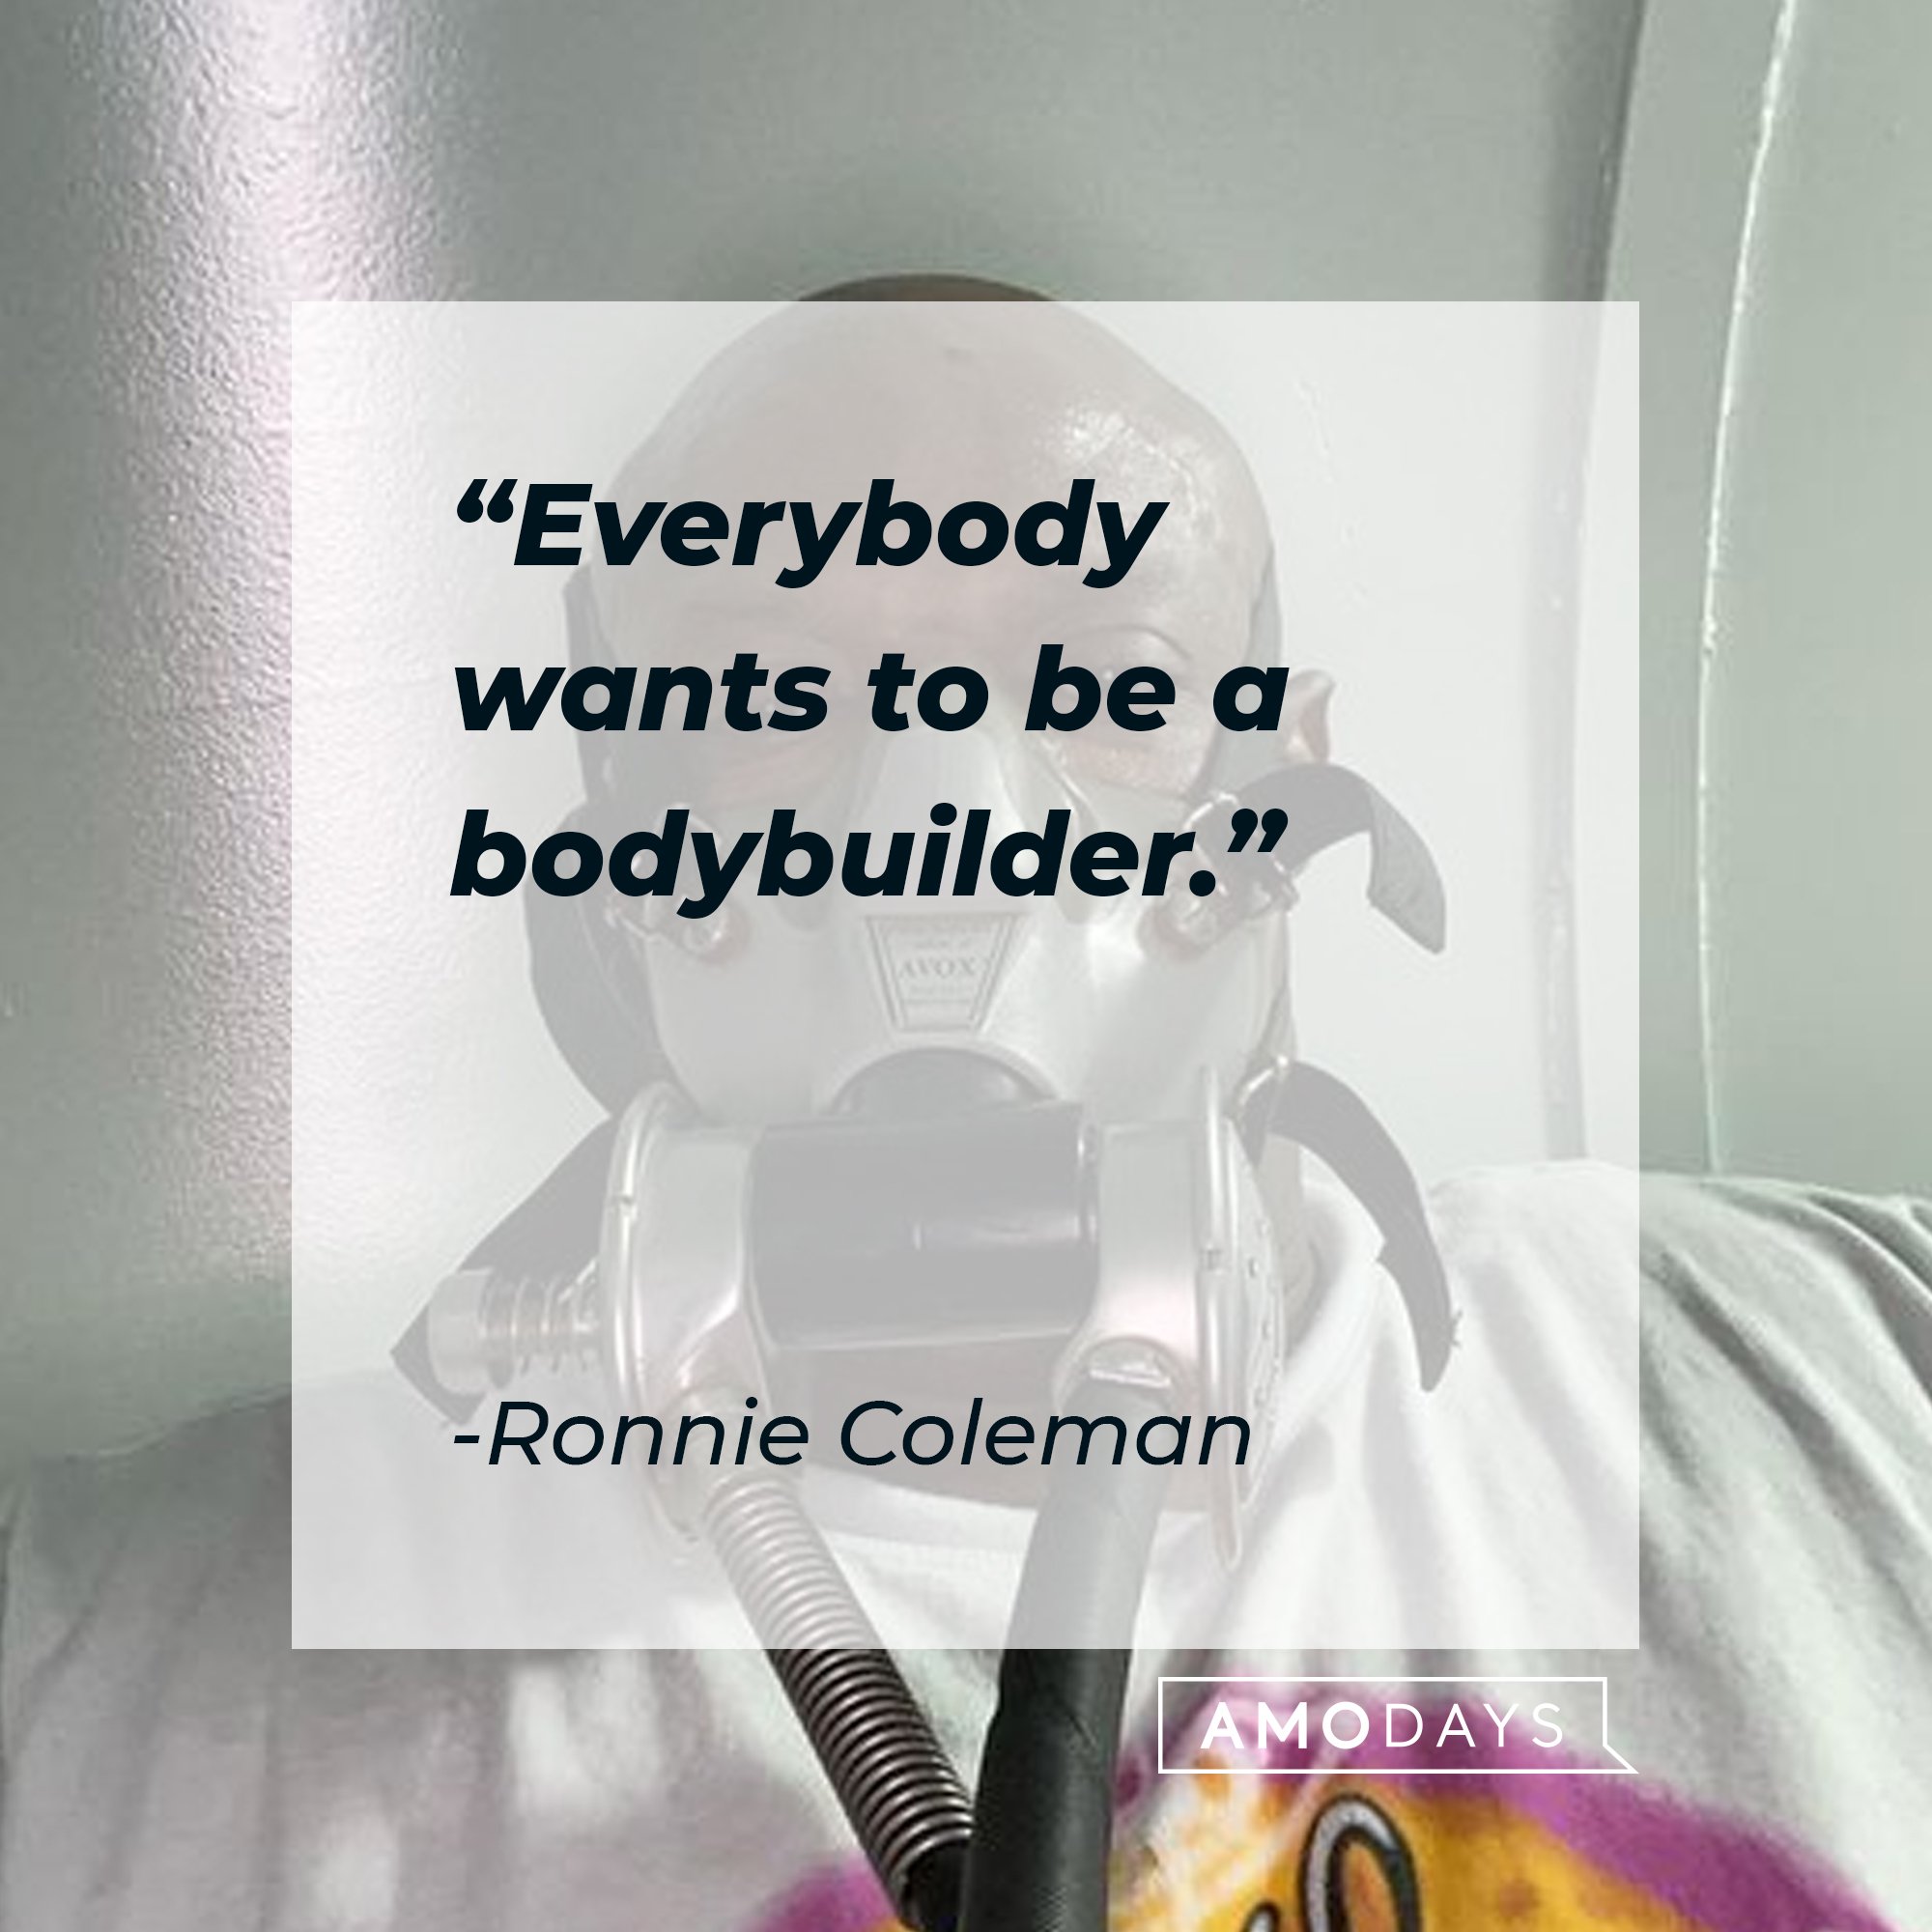 Ronnie Coleman’s quote: “Everybody wants to be a bodybuilder." | Image: AmoDays